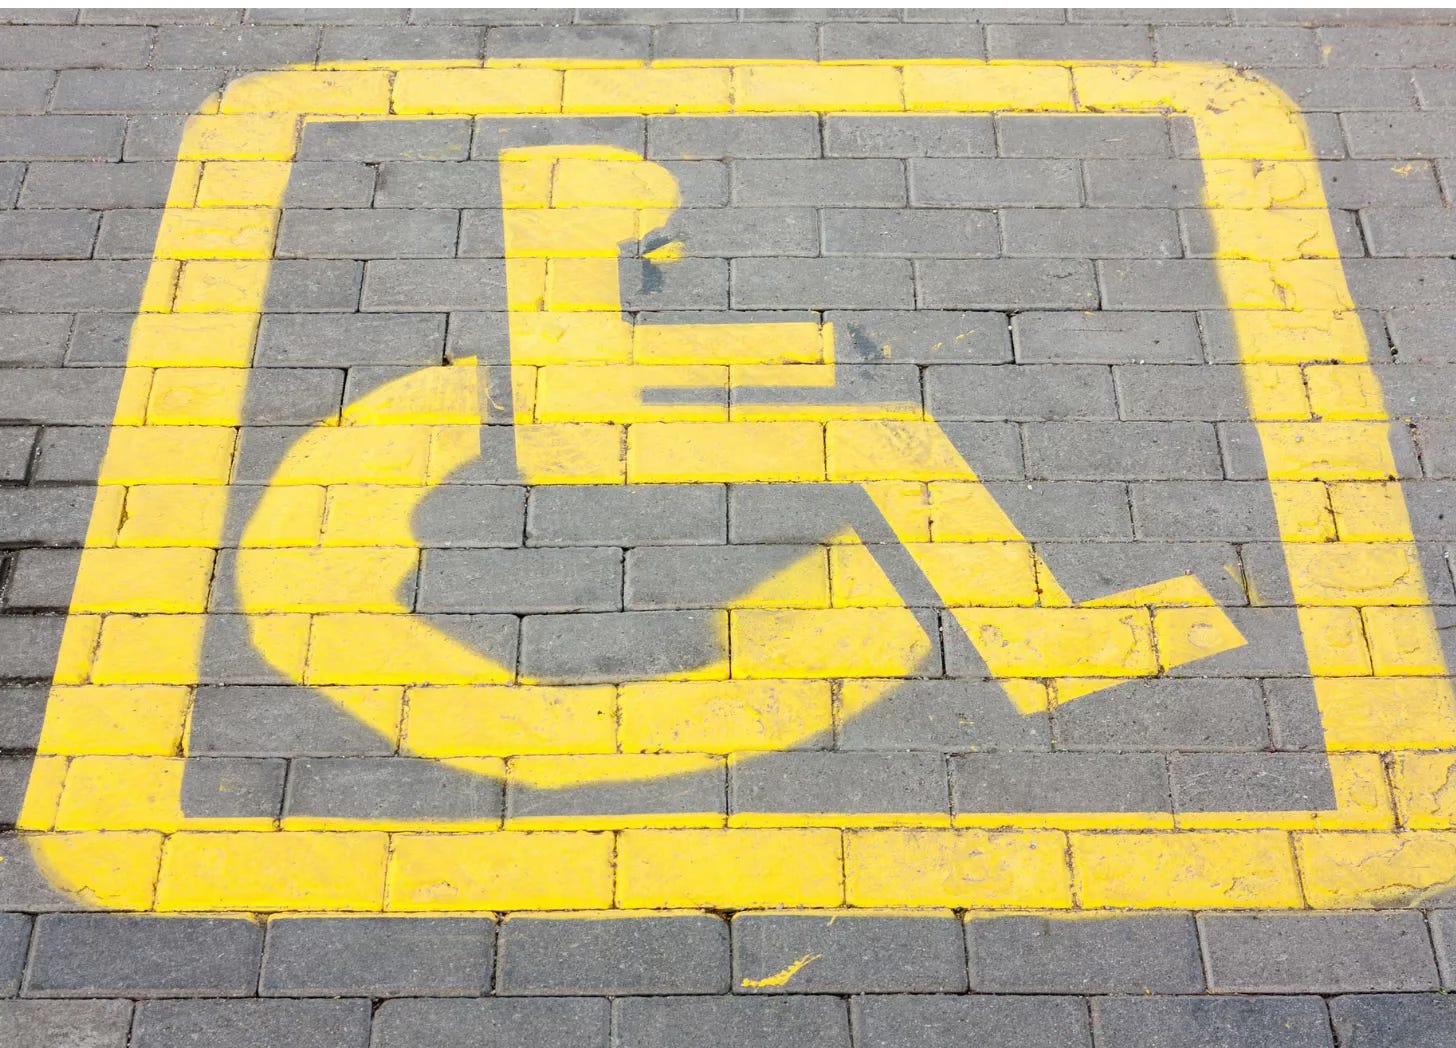 Yellow wheelchair symbol painted on a brick pavement